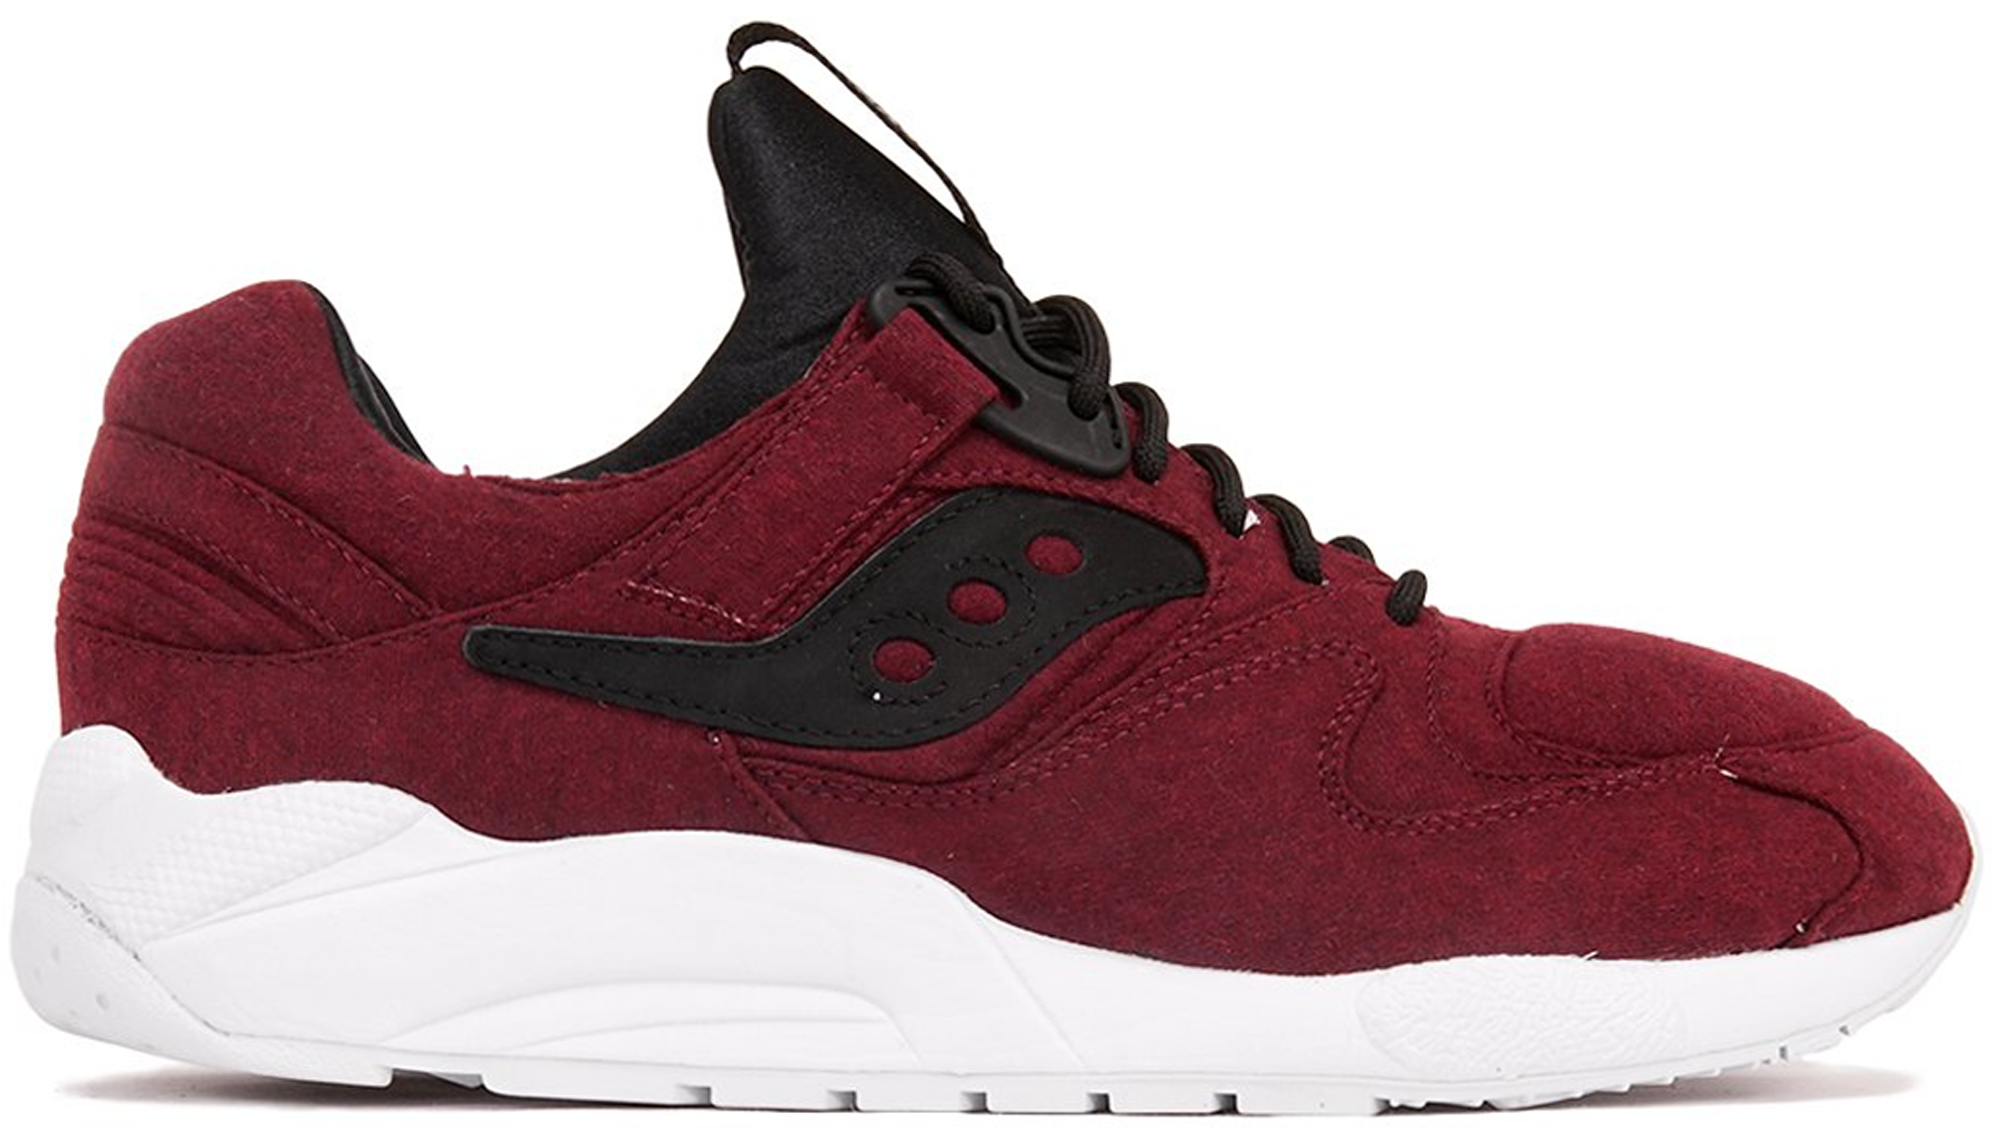 saucony grid 9000 new release